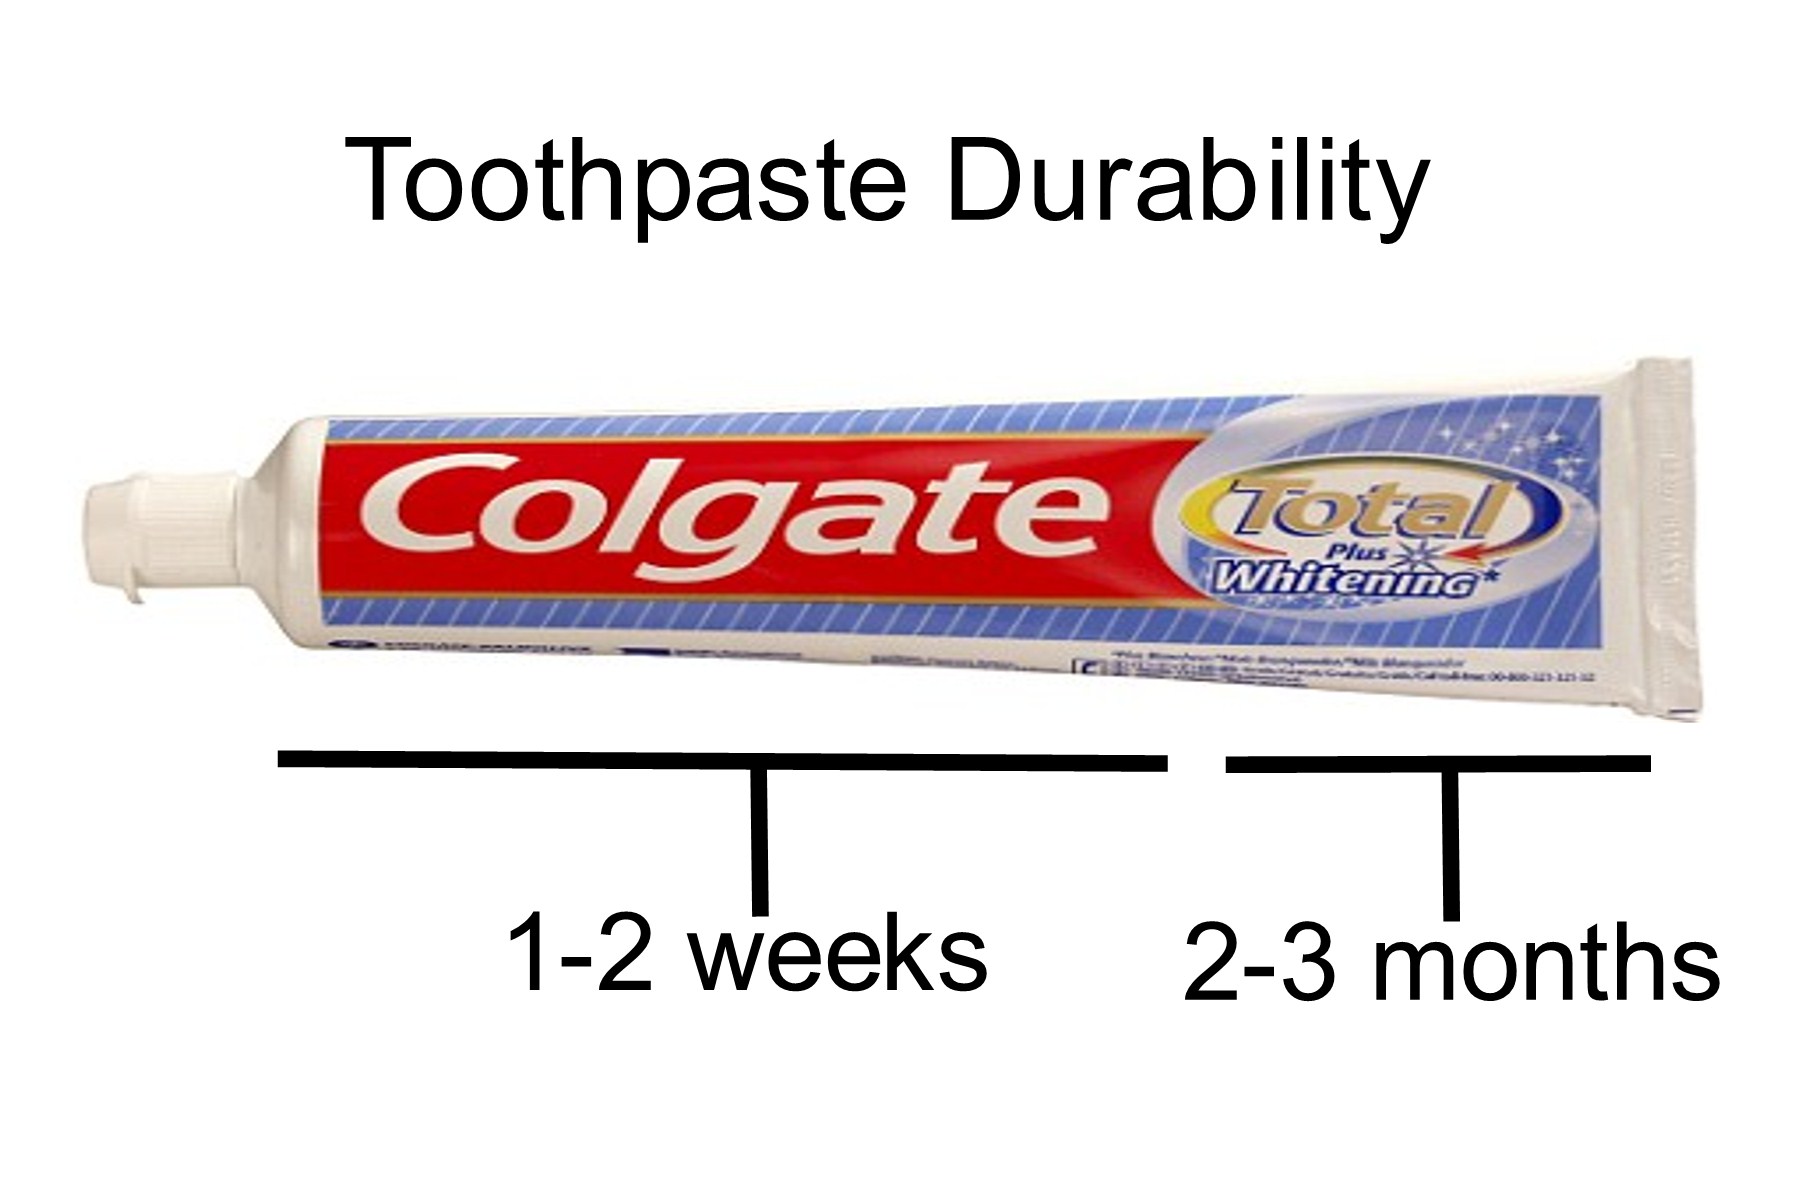 Toothpaster durability - meme